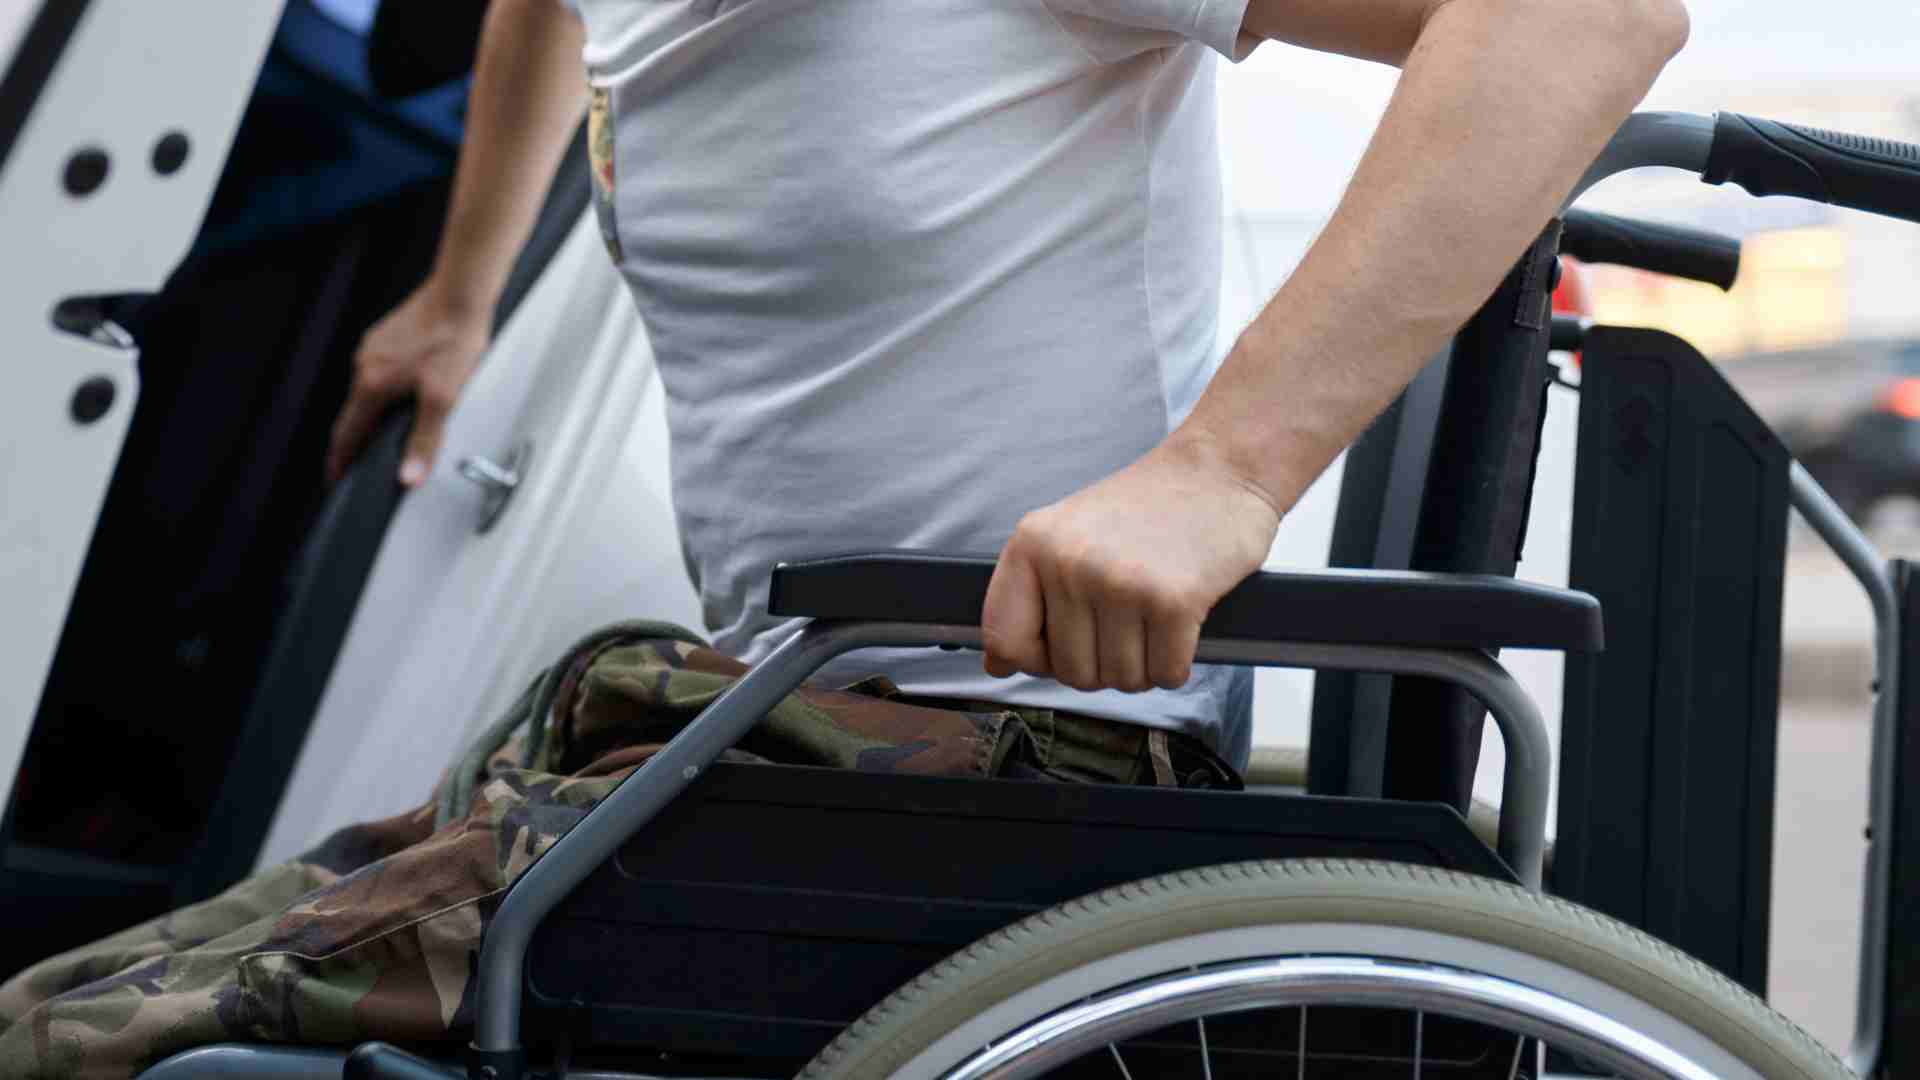 Disability recipients may have lower benefits on average than those who are in retirement according to Social Security information